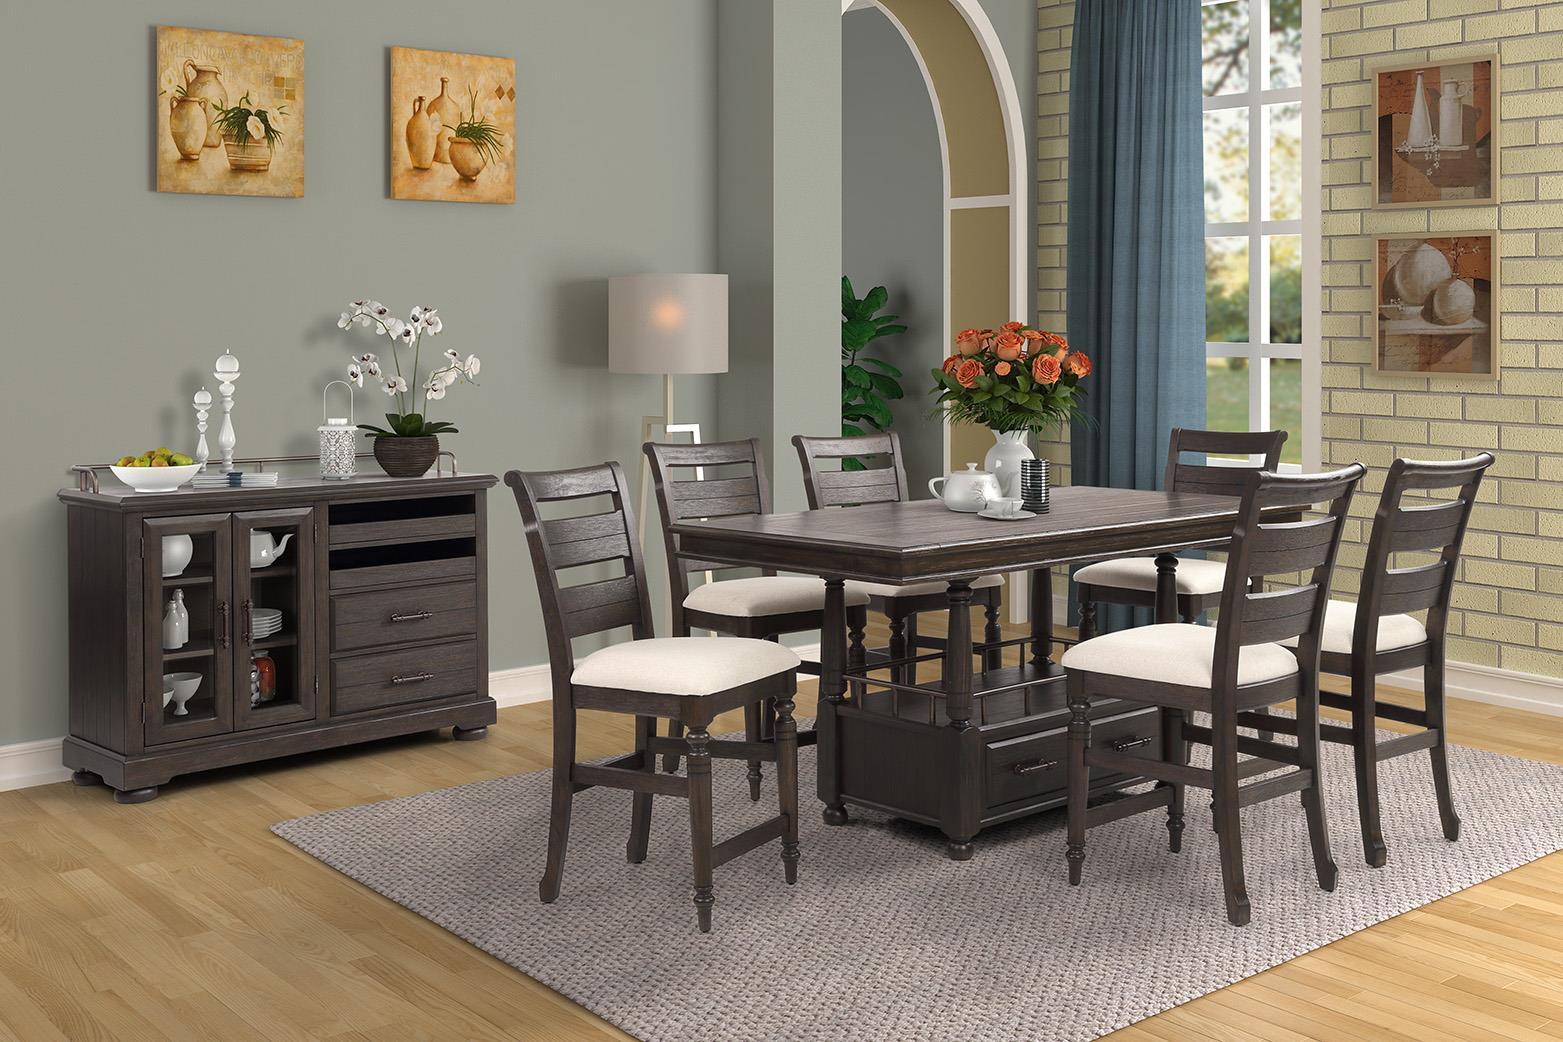 Traditional Counter Table Set BELLAMY LANE 5910-530-Set-7 5910-530-7pcs in Elm Fabric